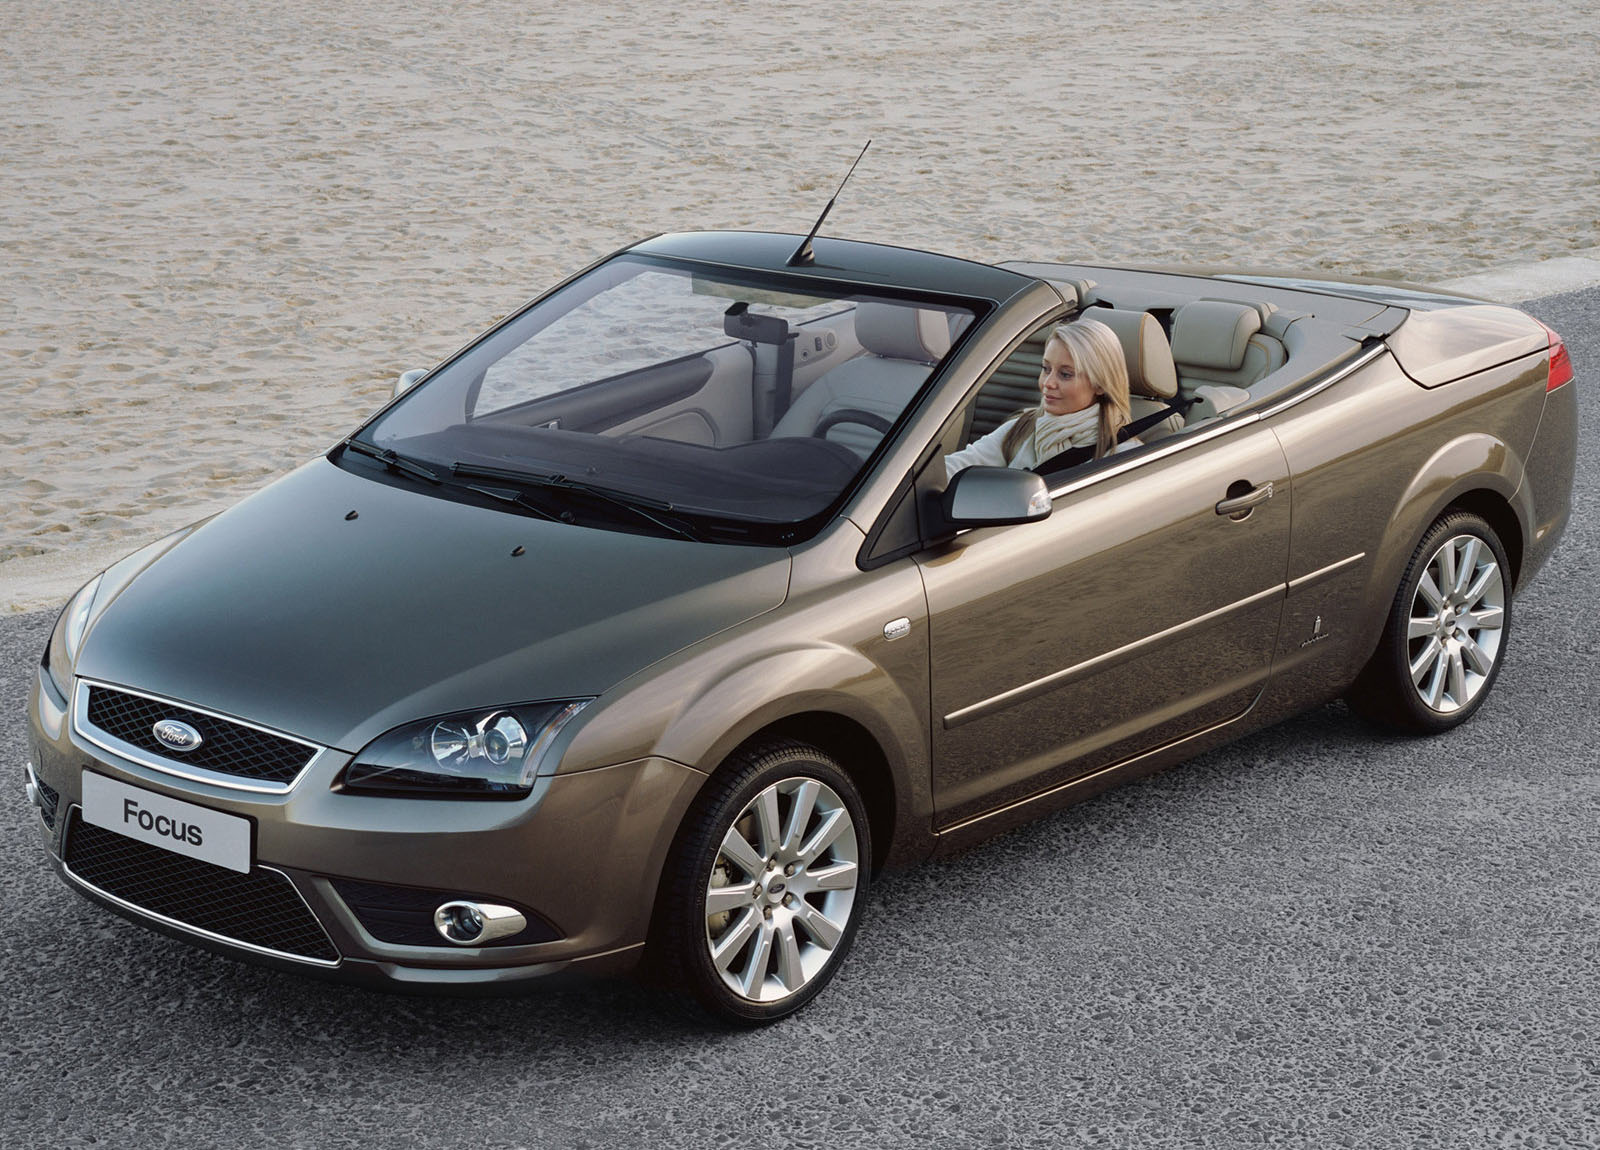 Ford Focus Coupe-Cabriolet photo #1